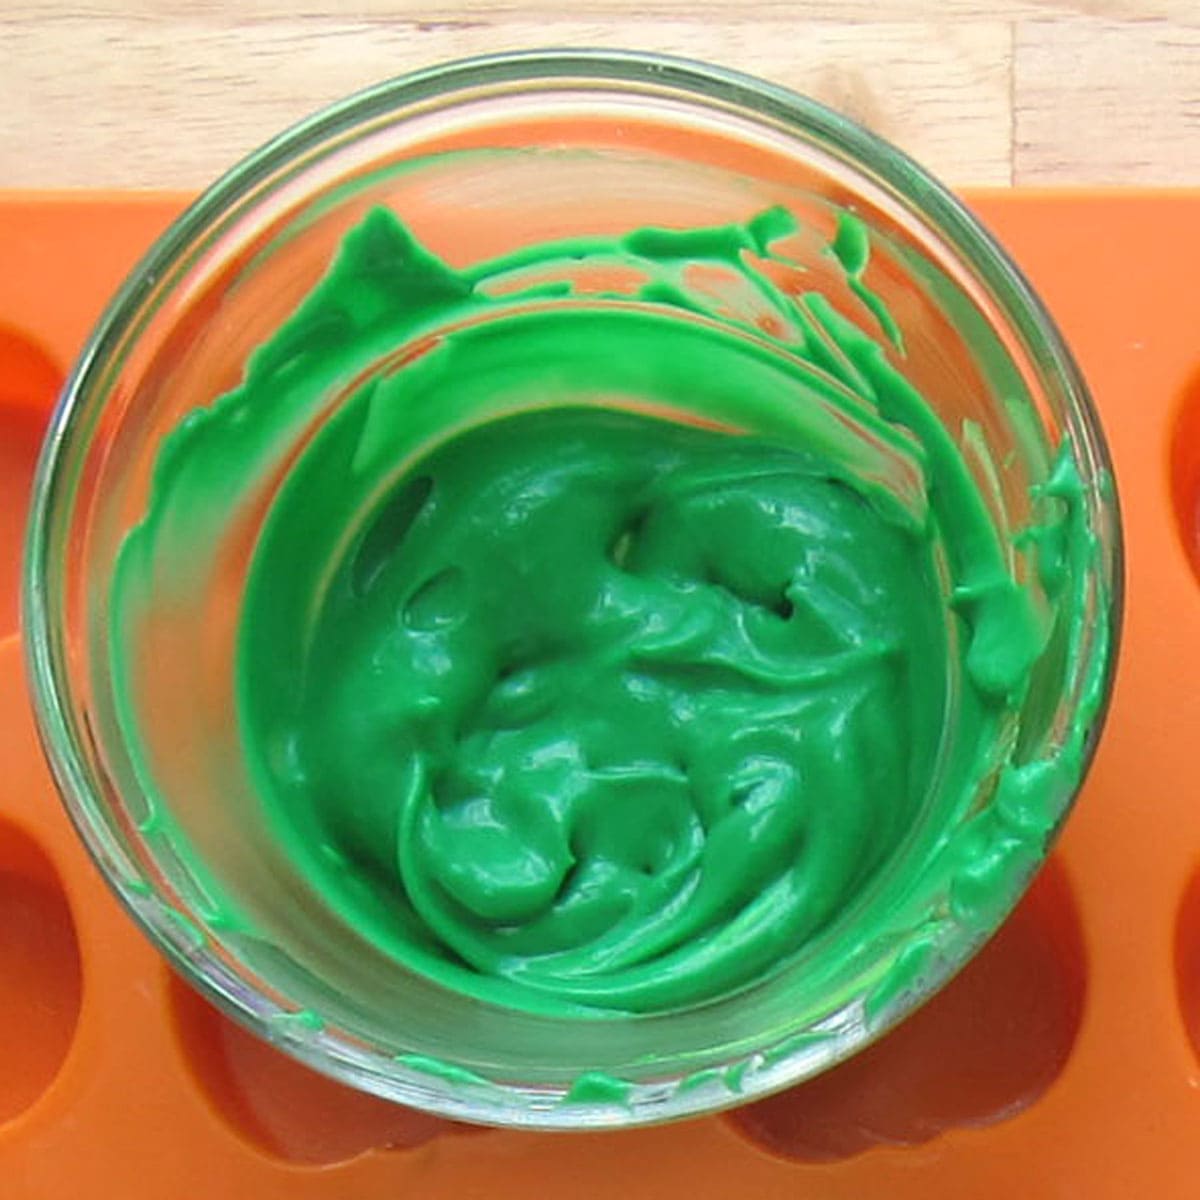 a bowl of green-colored cheesecake filling.